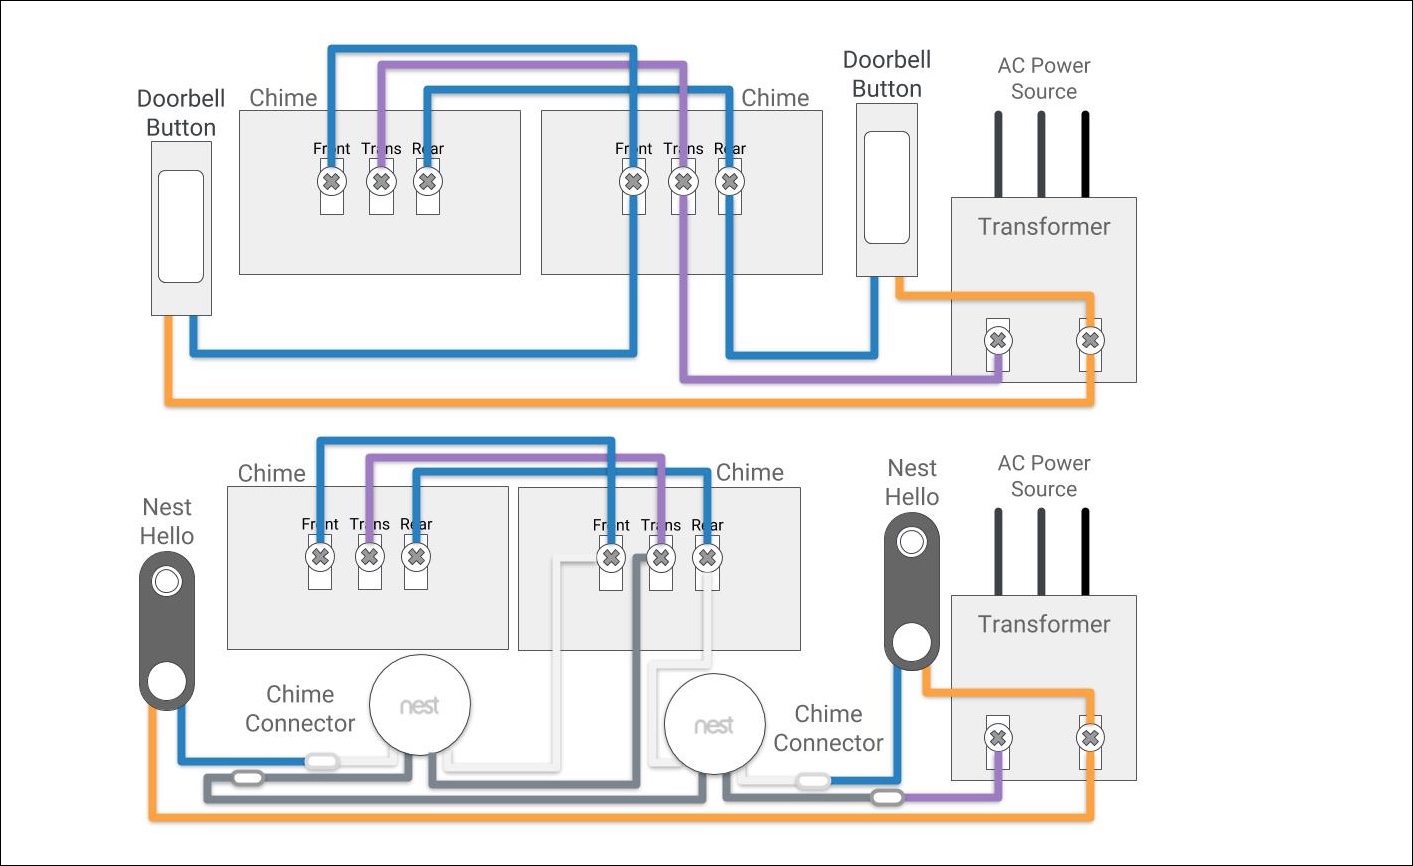 Wiring diagram for 2 nest hello doorbells with separate chimes from one transformer. - Google